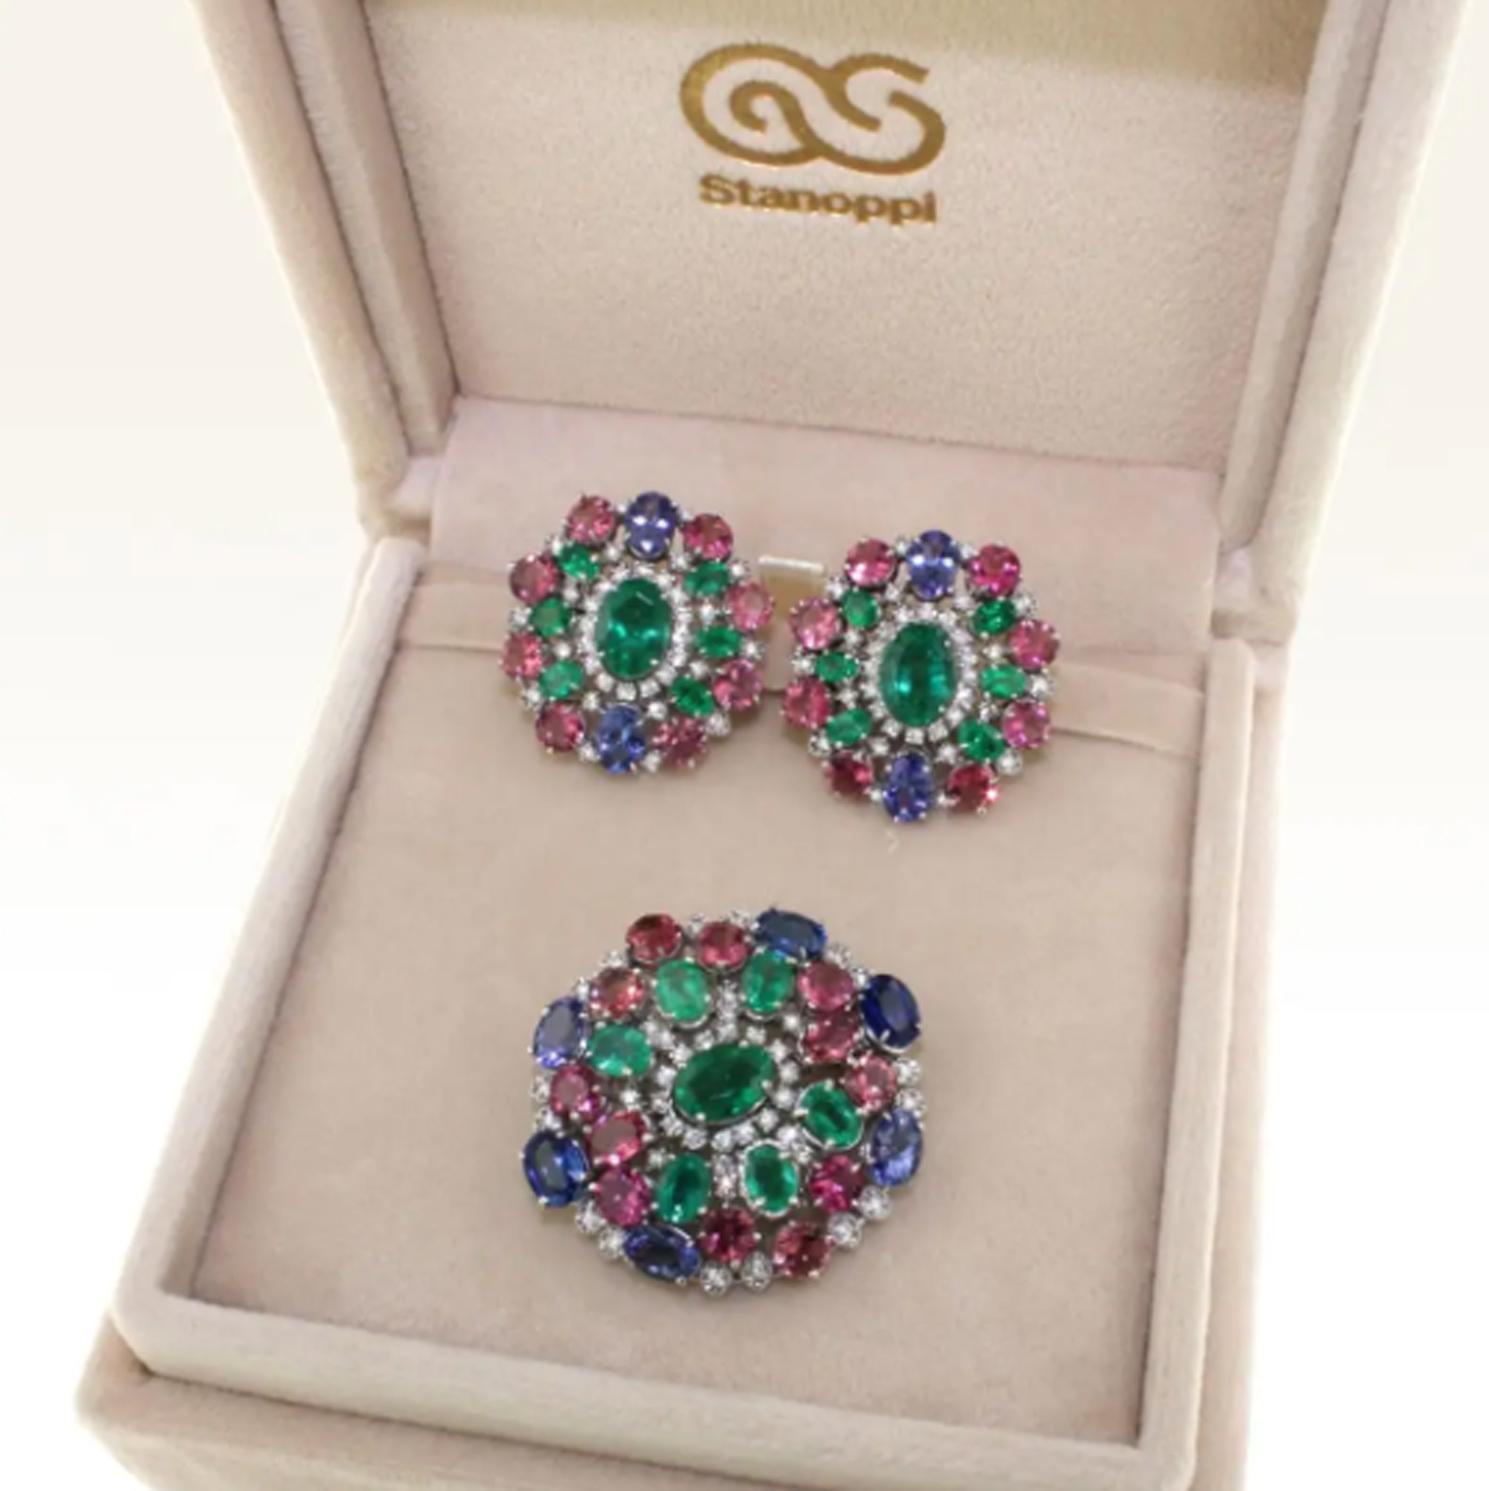 Perfect mix of craftmanship and natural beauty  making it impossible to find two of the same kind. 
The combinations of stones with intense colors create a very unique set for important occasions. Made in Italy by Stanoppi Jewellery since 1948.